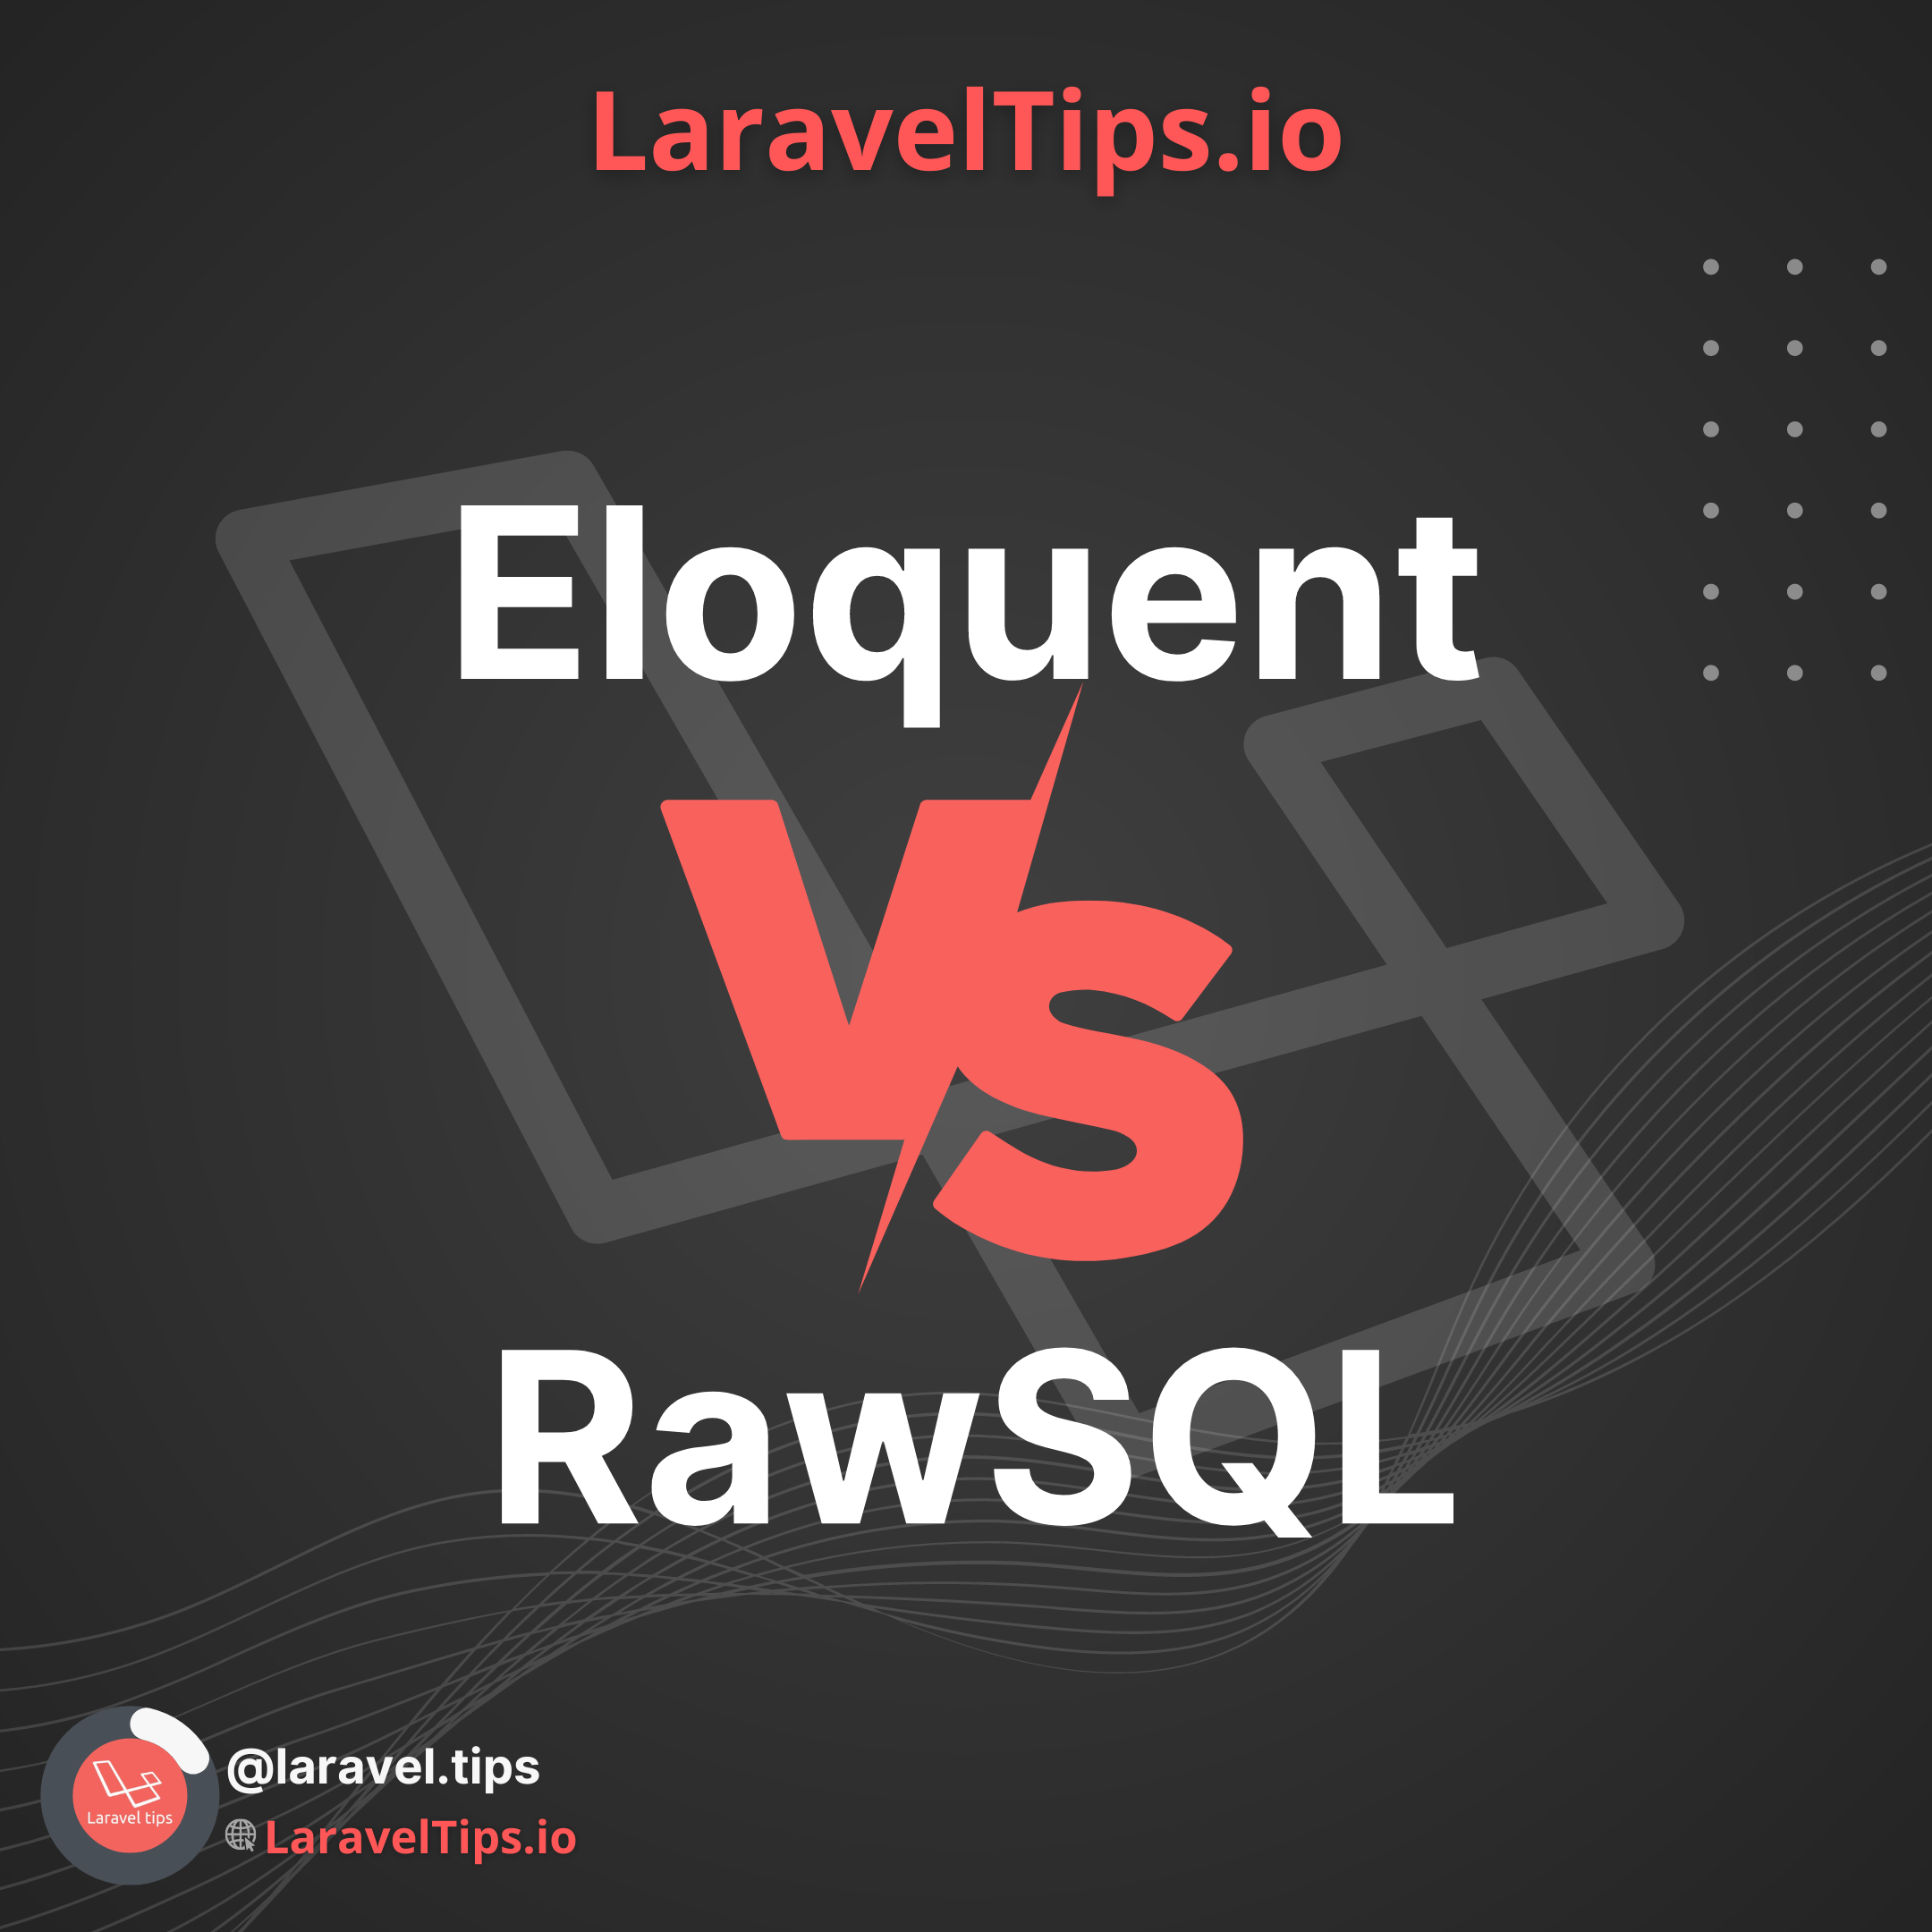 Eloquent or RawSQL in Laravel Which is Better for Your Application